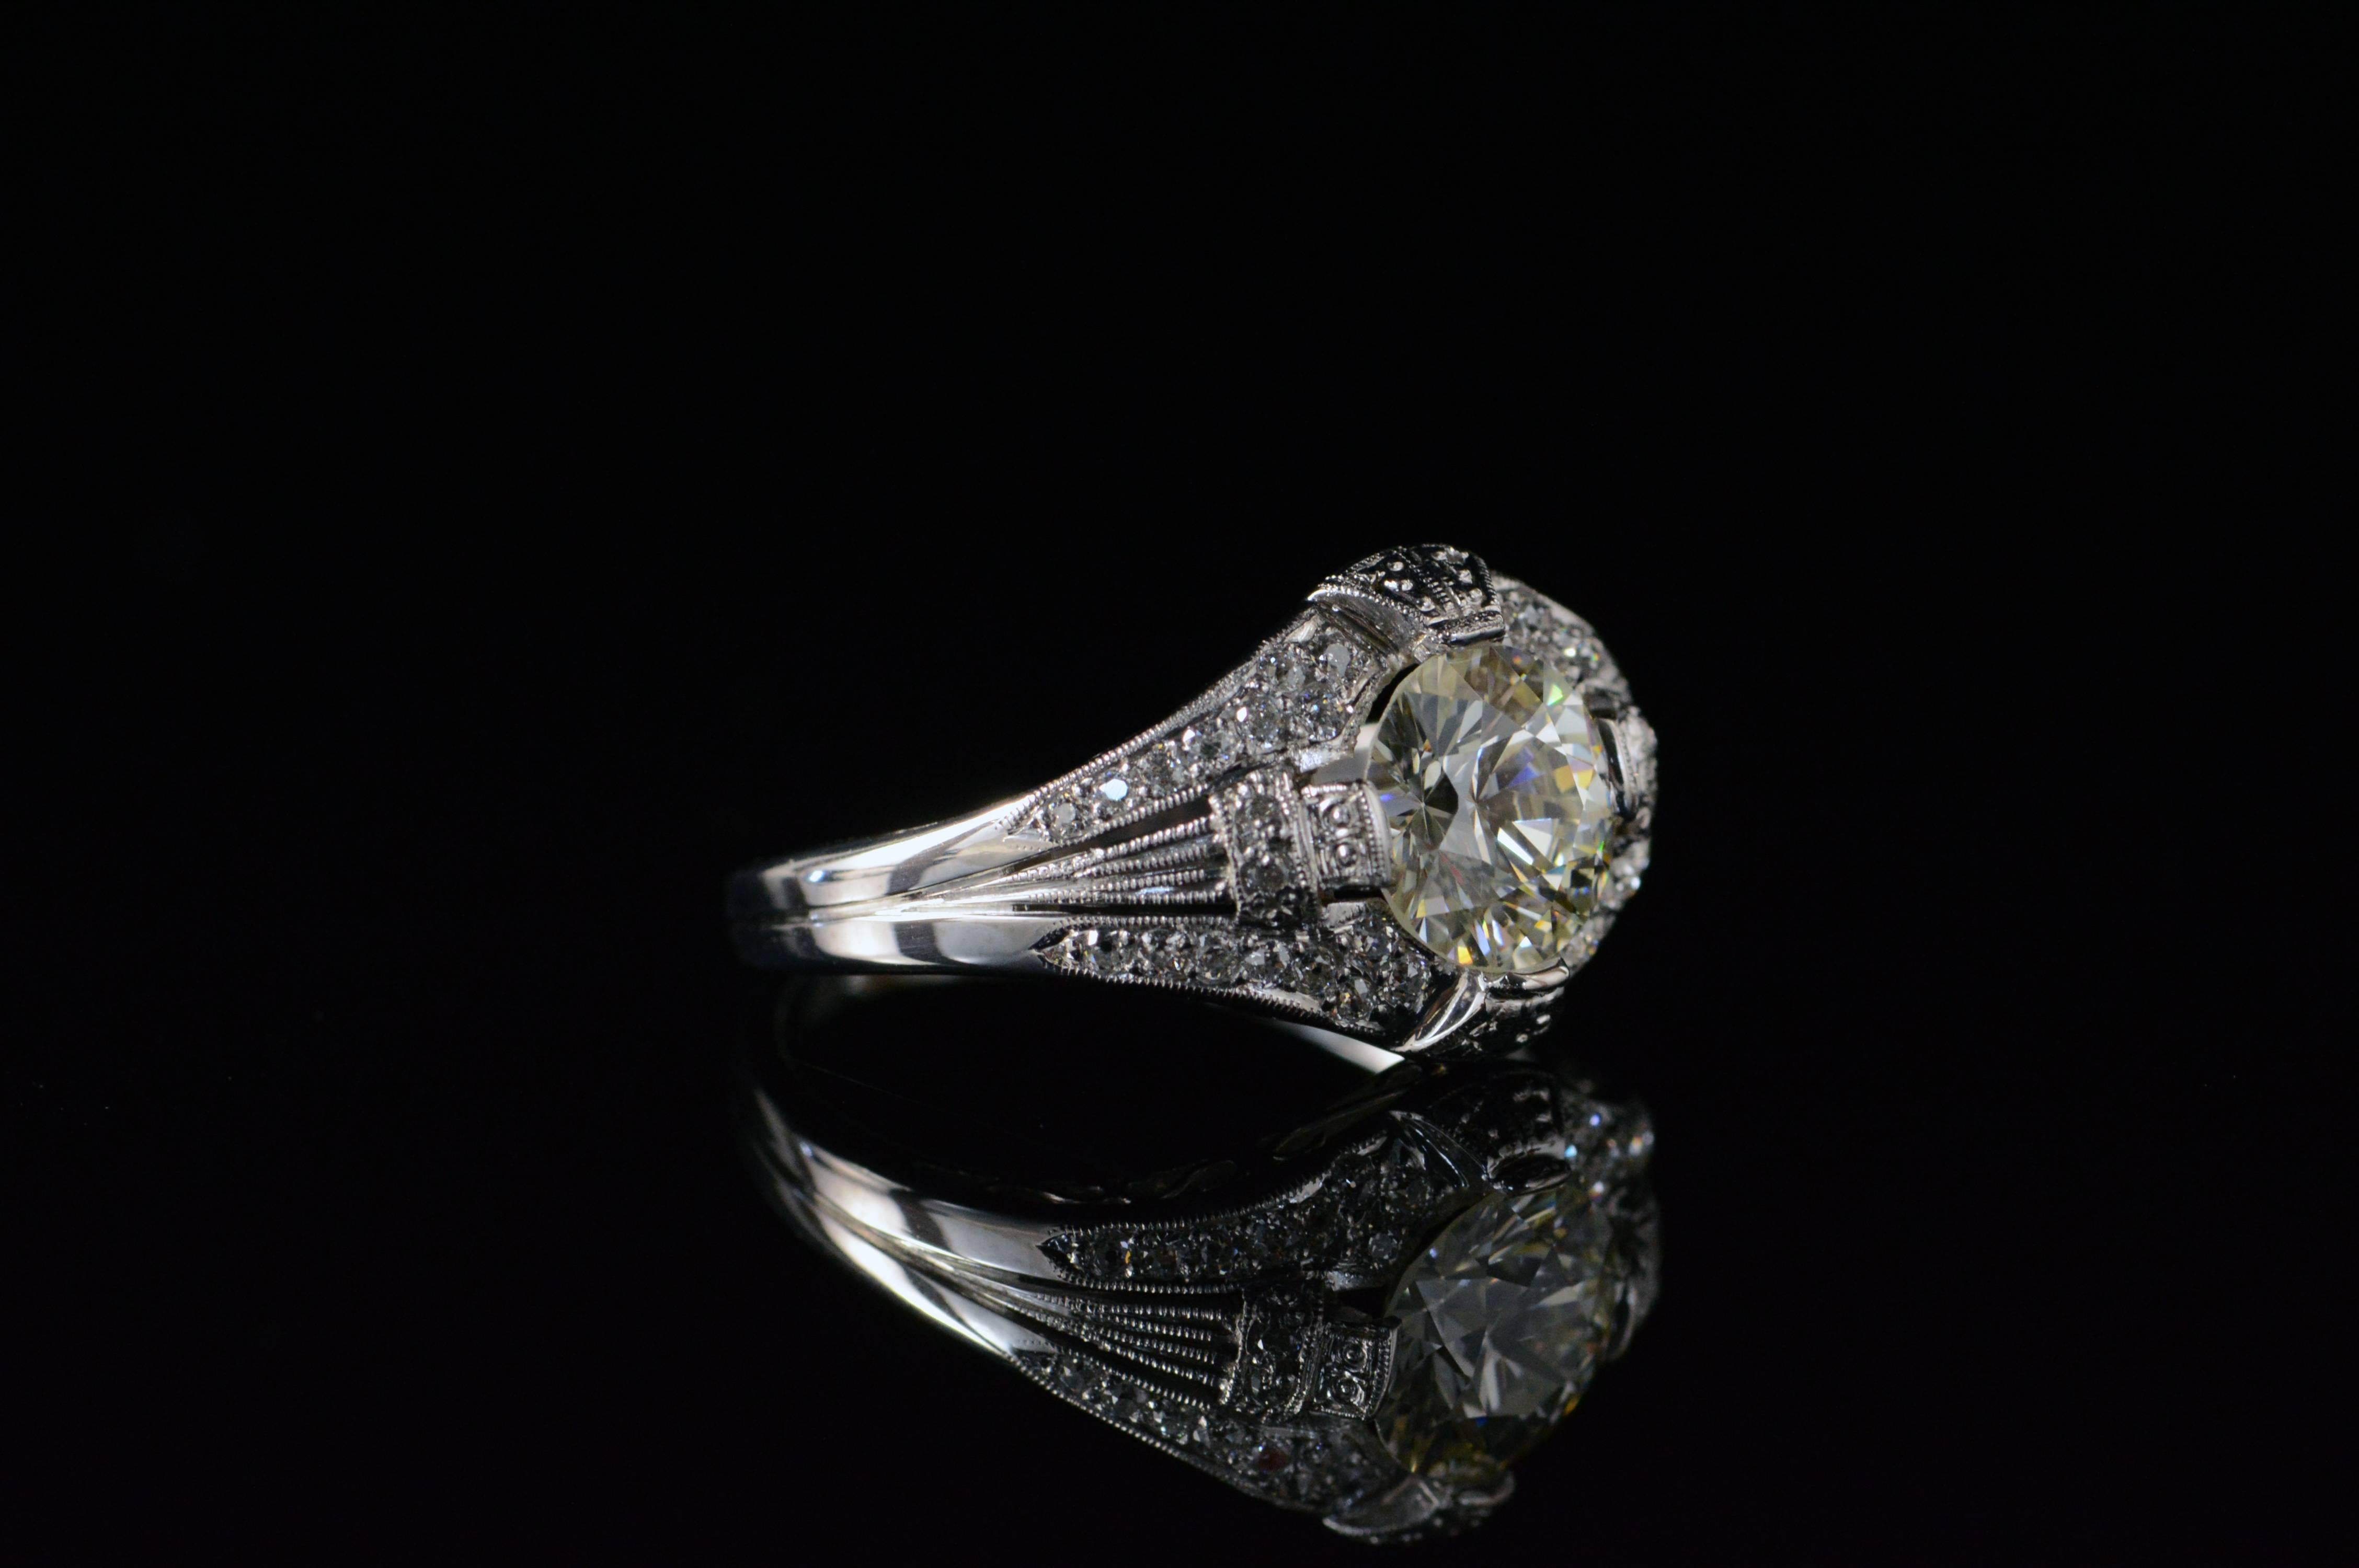 Handcrafted with fantastic detailing and clean lines, this ring is a pristine example of the Art Deco movement. The round brilliant cut diamond that is the center piece of this ring was a fresh invention at the time of this ring’s creation and the